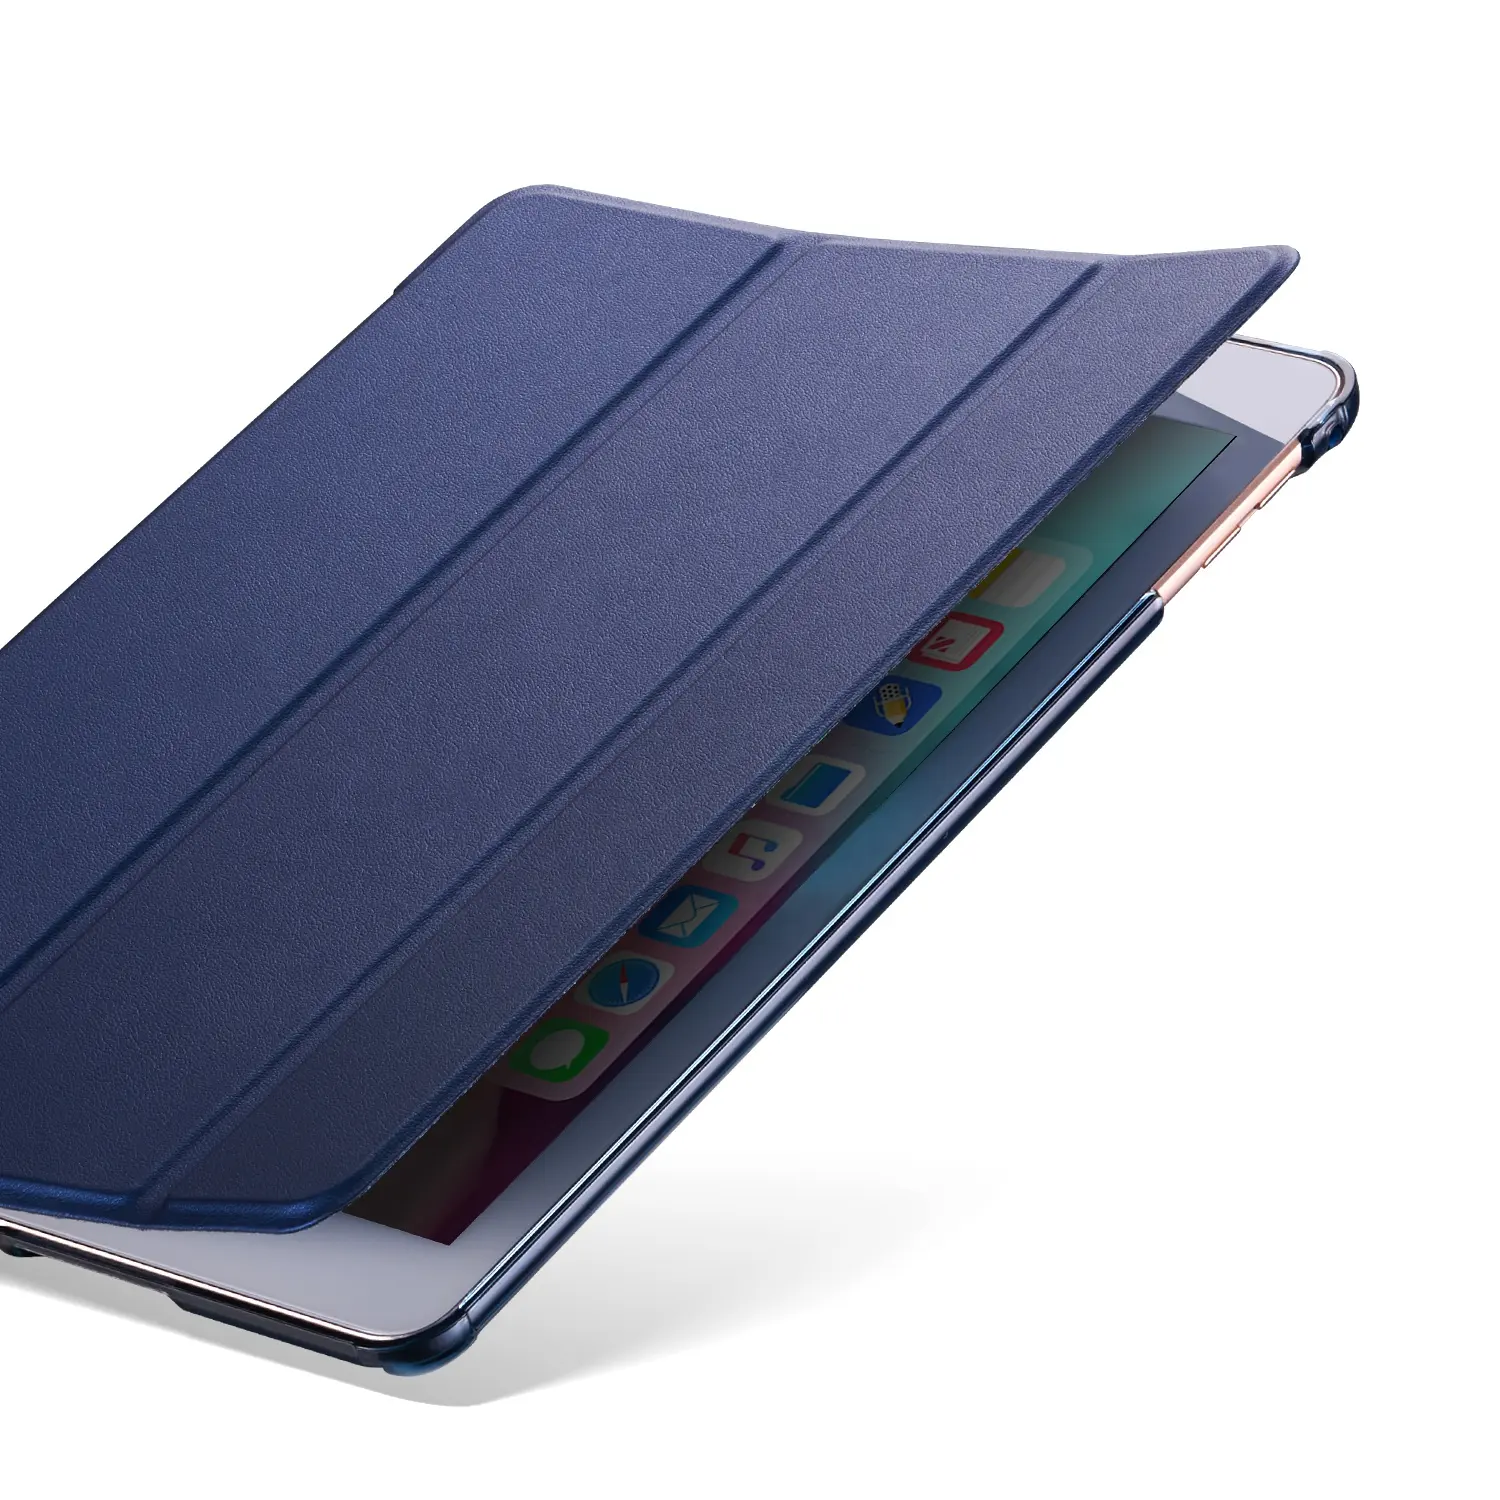 Universal Foldable Smart Case Cover For ipad 5/6/7/8/空気2 Cover Tablet Case